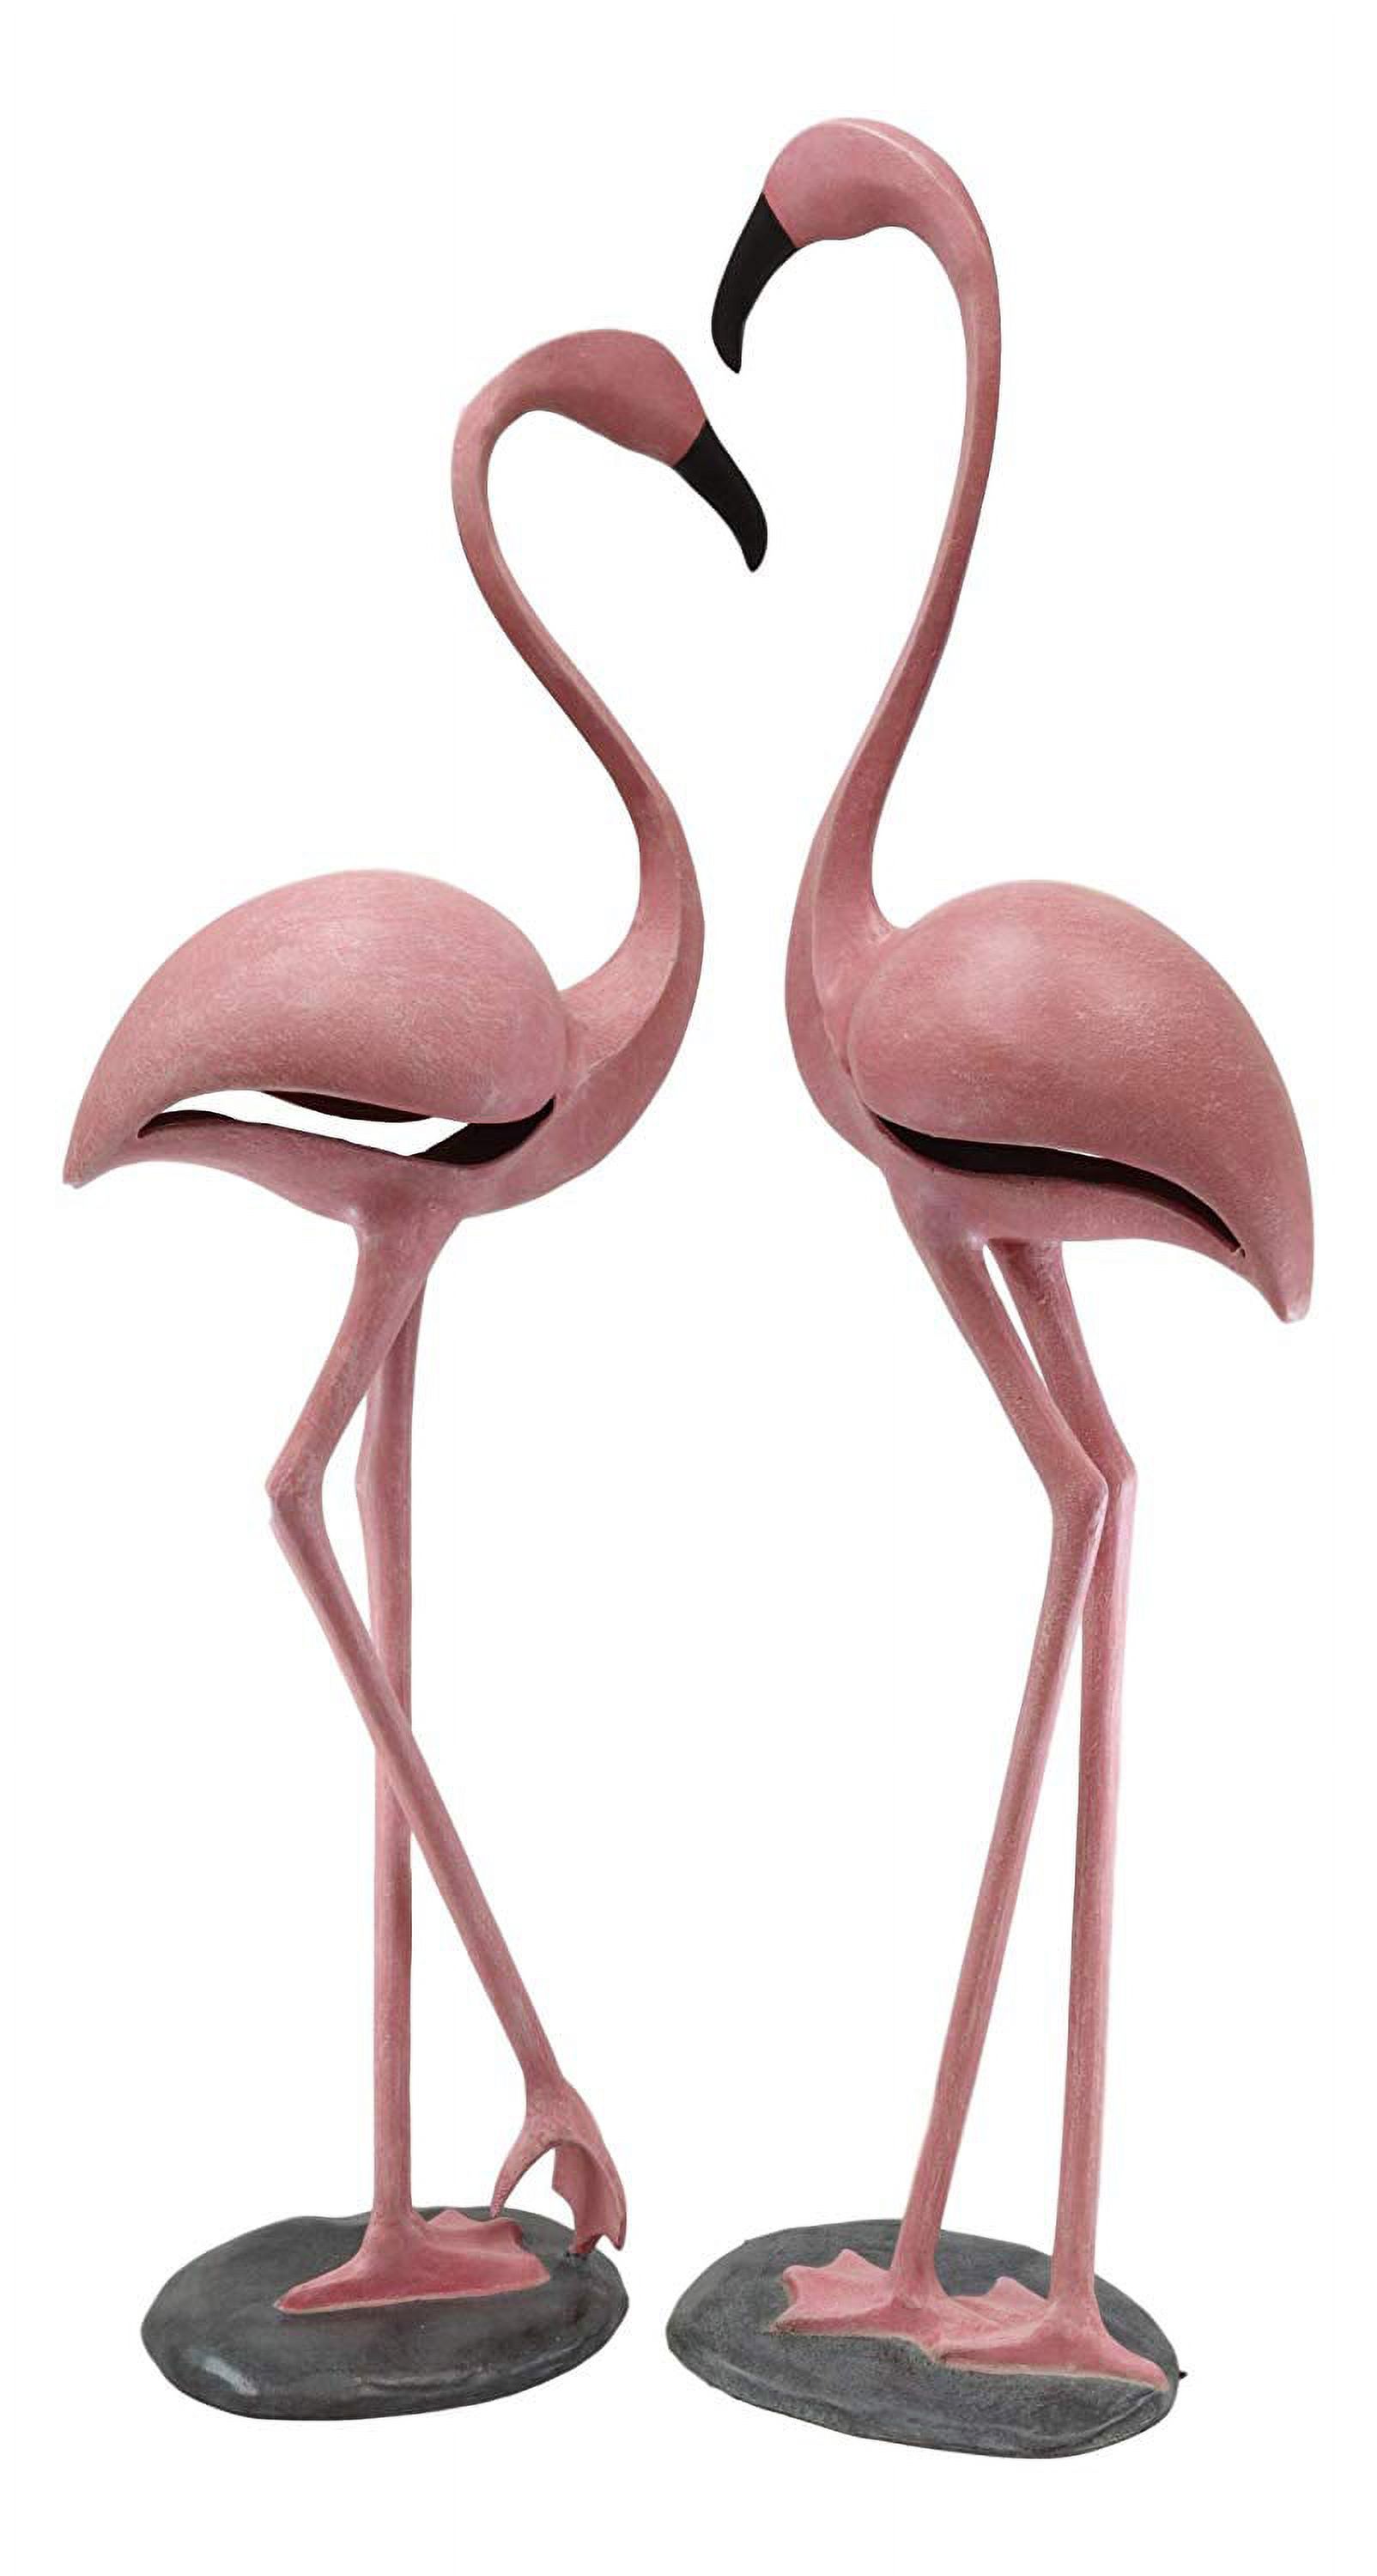 Ebros Large Set of 2 Colorful Tropical Rainforest Pink Flamingo Garden Statues - image 5 of 6